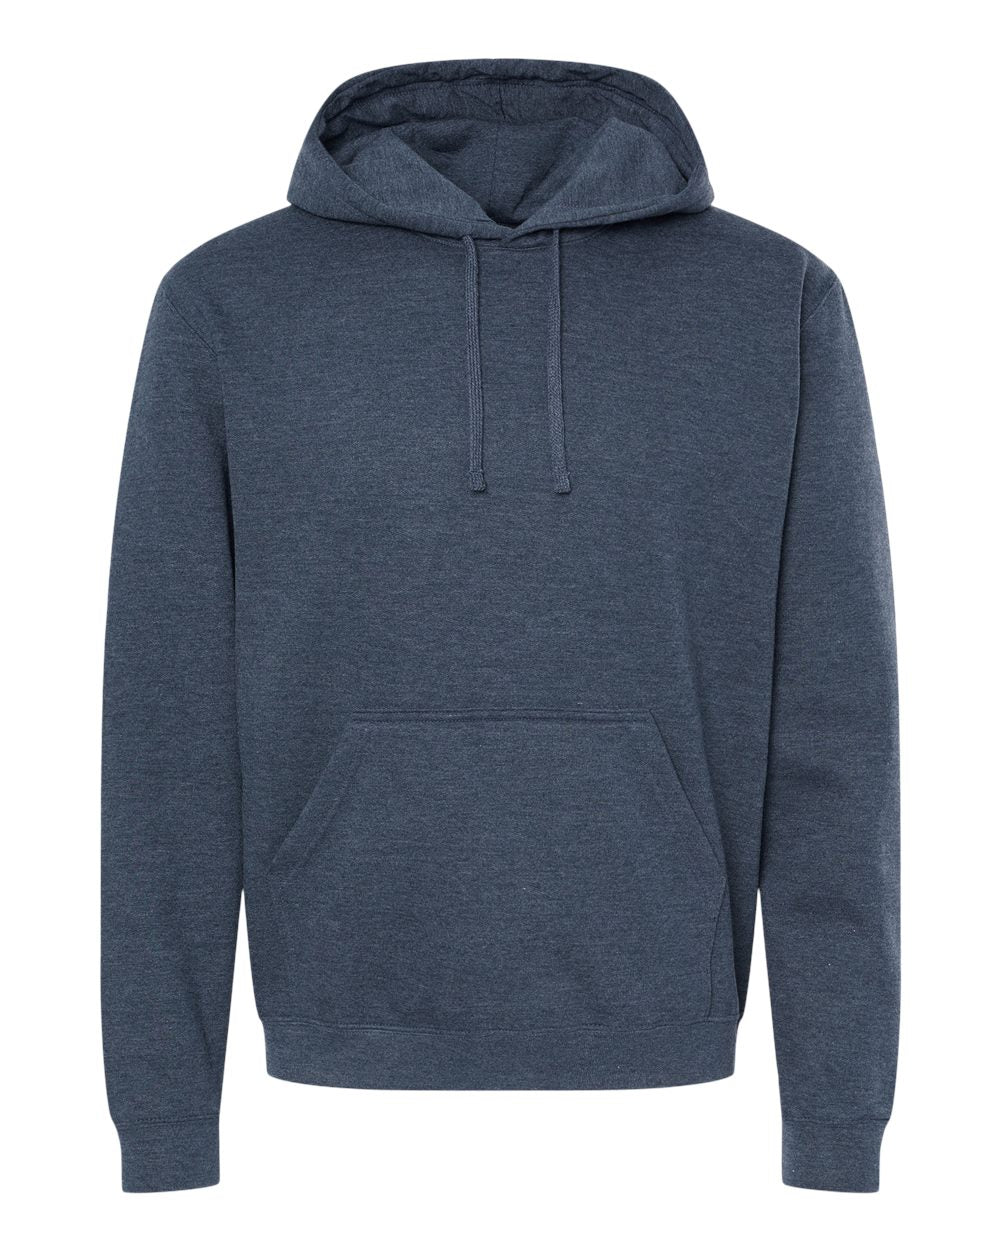 M&O Unisex Pullover Hoodie 3320 #color_Heather Navy